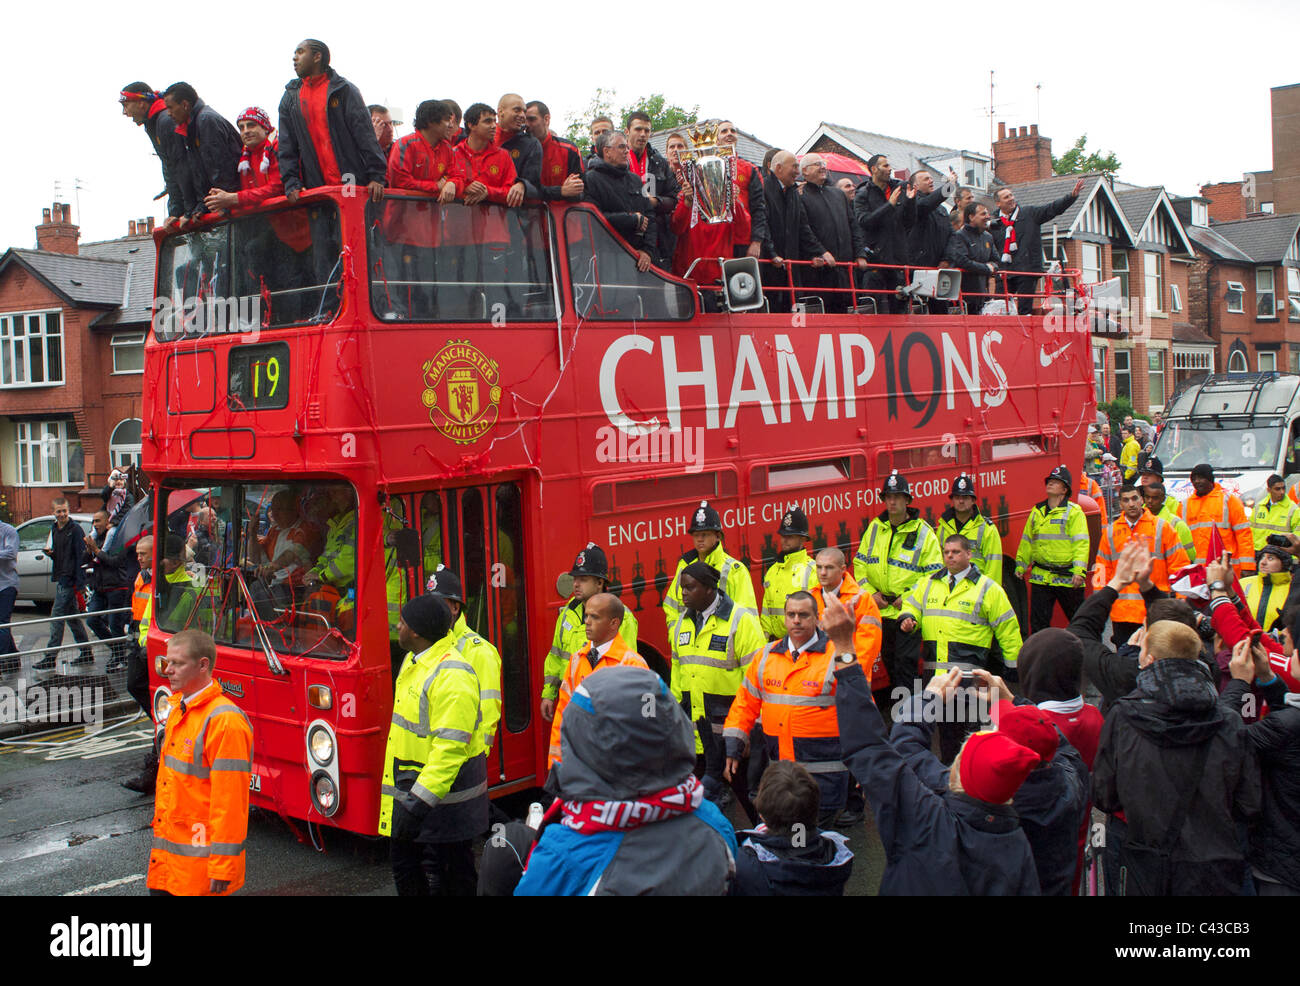 Manchester United Bus High Resolution Stock Photography And Images Alamy